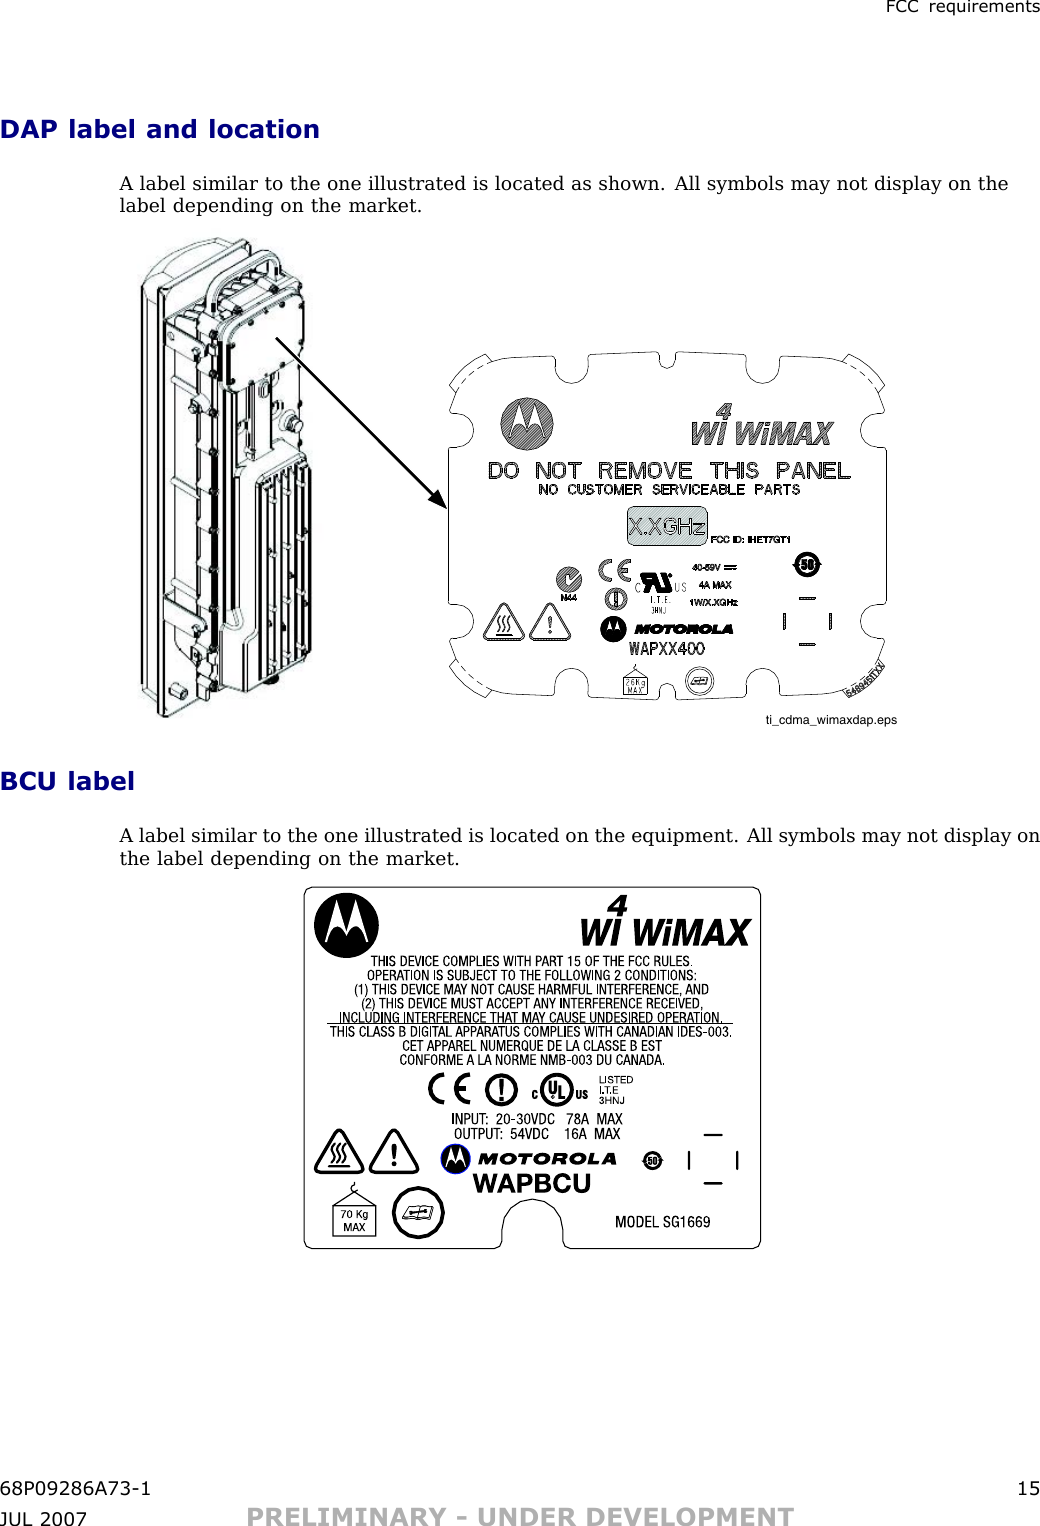 FCC requirementsDAP label and locationA label similar to the one illustrated is located as shown. All symbols may not display on thelabel depending on the market.ti_cdma_wimaxdap.epsBCU labelA label similar to the one illustrated is located on the equipment. All symbols may not display onthe label depending on the market.68P09286A73 -1 15JUL 2007 PRELIMINARY - UNDER DEVELOPMENT